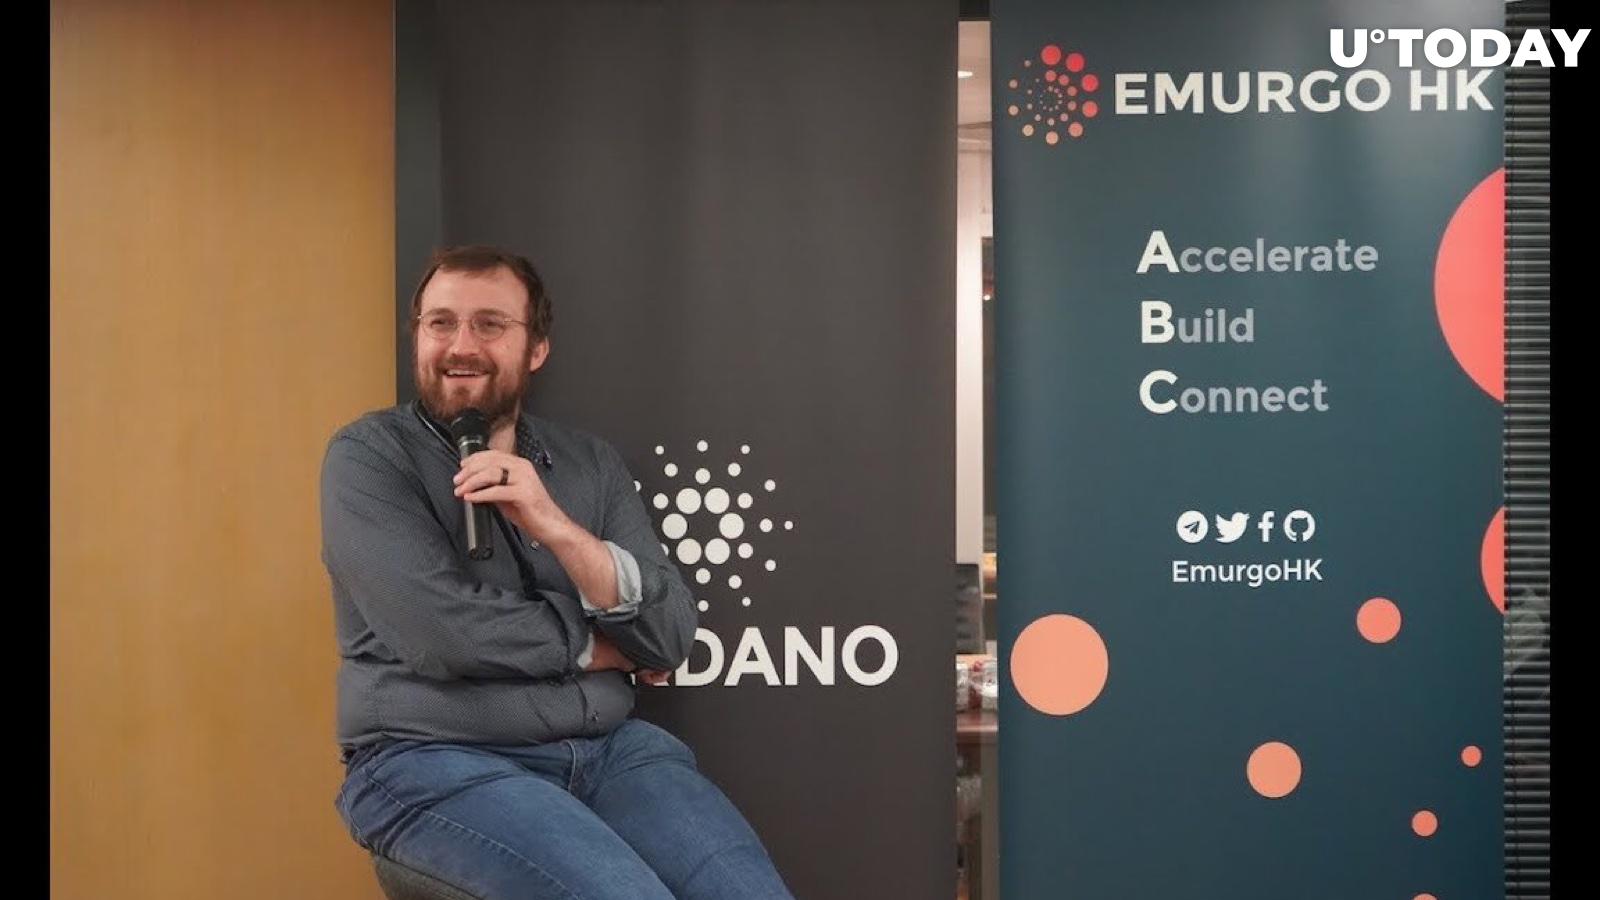 ‘They Are Just Not Honest Actors’: Cardano’s Charles Hoskinson Slams Breakermag for Doing Hit Piece on Him  